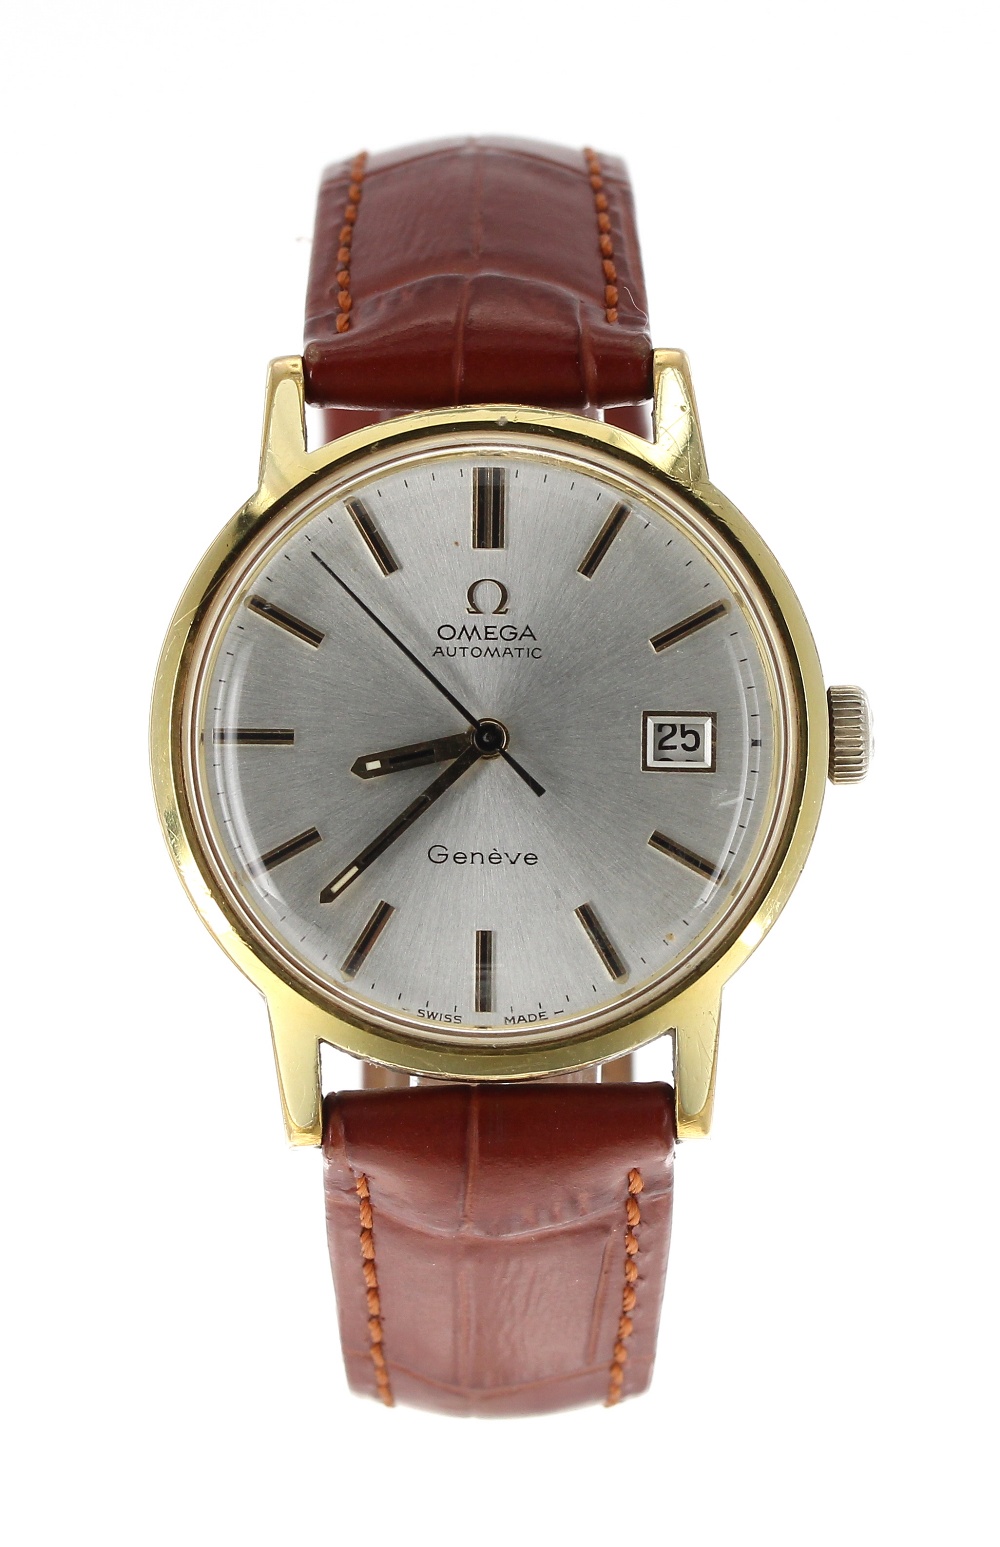 Omega Genéve automatic gold plated and stainless steel gentleman's wristwatch, ref 166098, circa